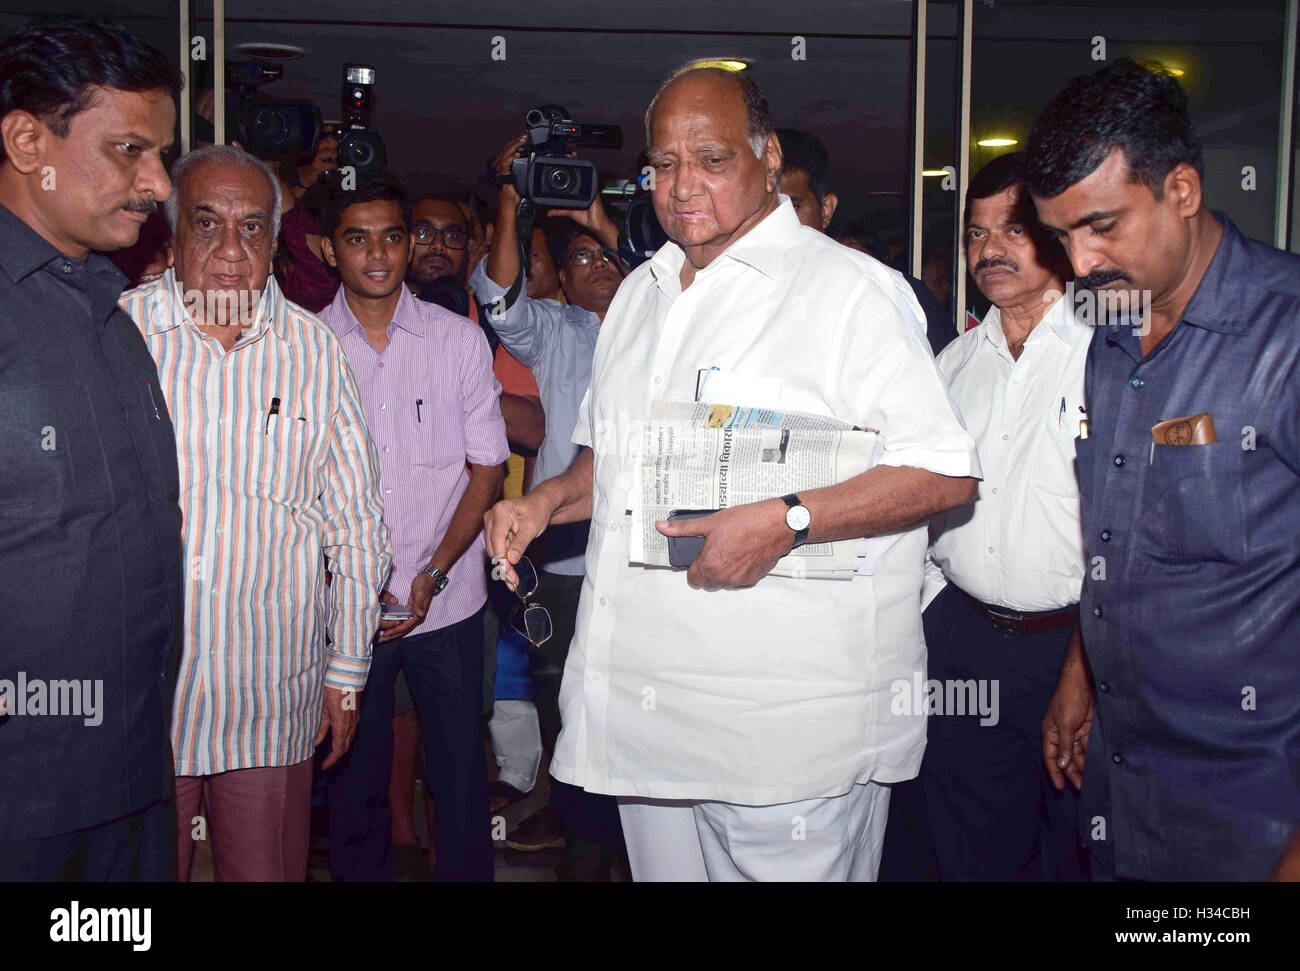 Nationalist Congress Party President Sharad Pawar attending the Board of Control for Cricket in India 87th AGM in Mumbai Stock Photo